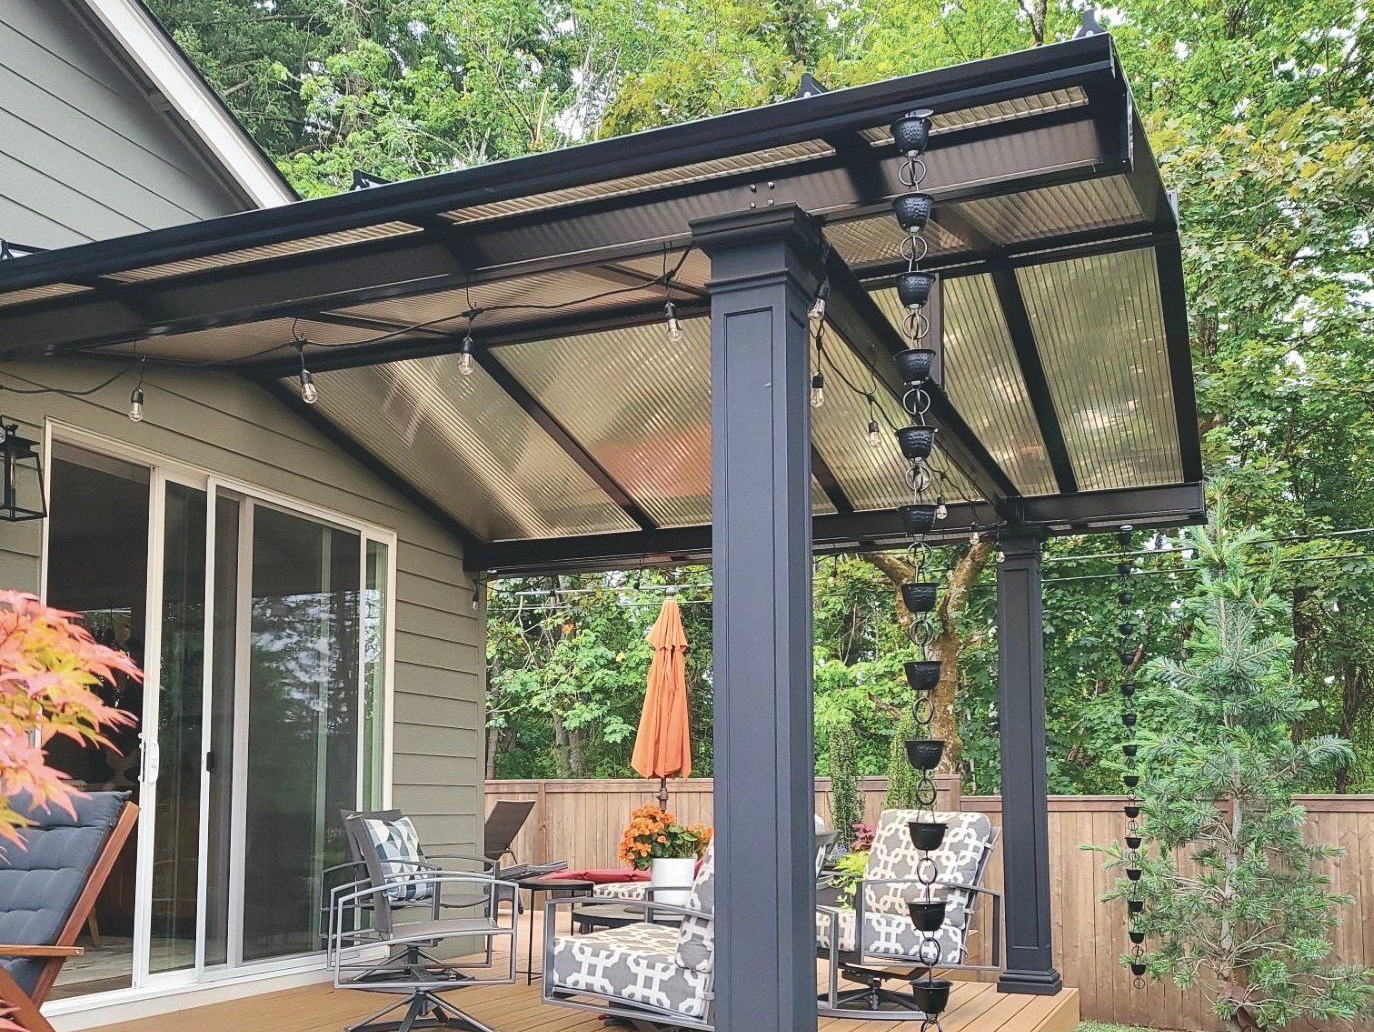 Patio Covers in S.E. Portland Oregon - Gable Roof with ACRYLITE Acrylic